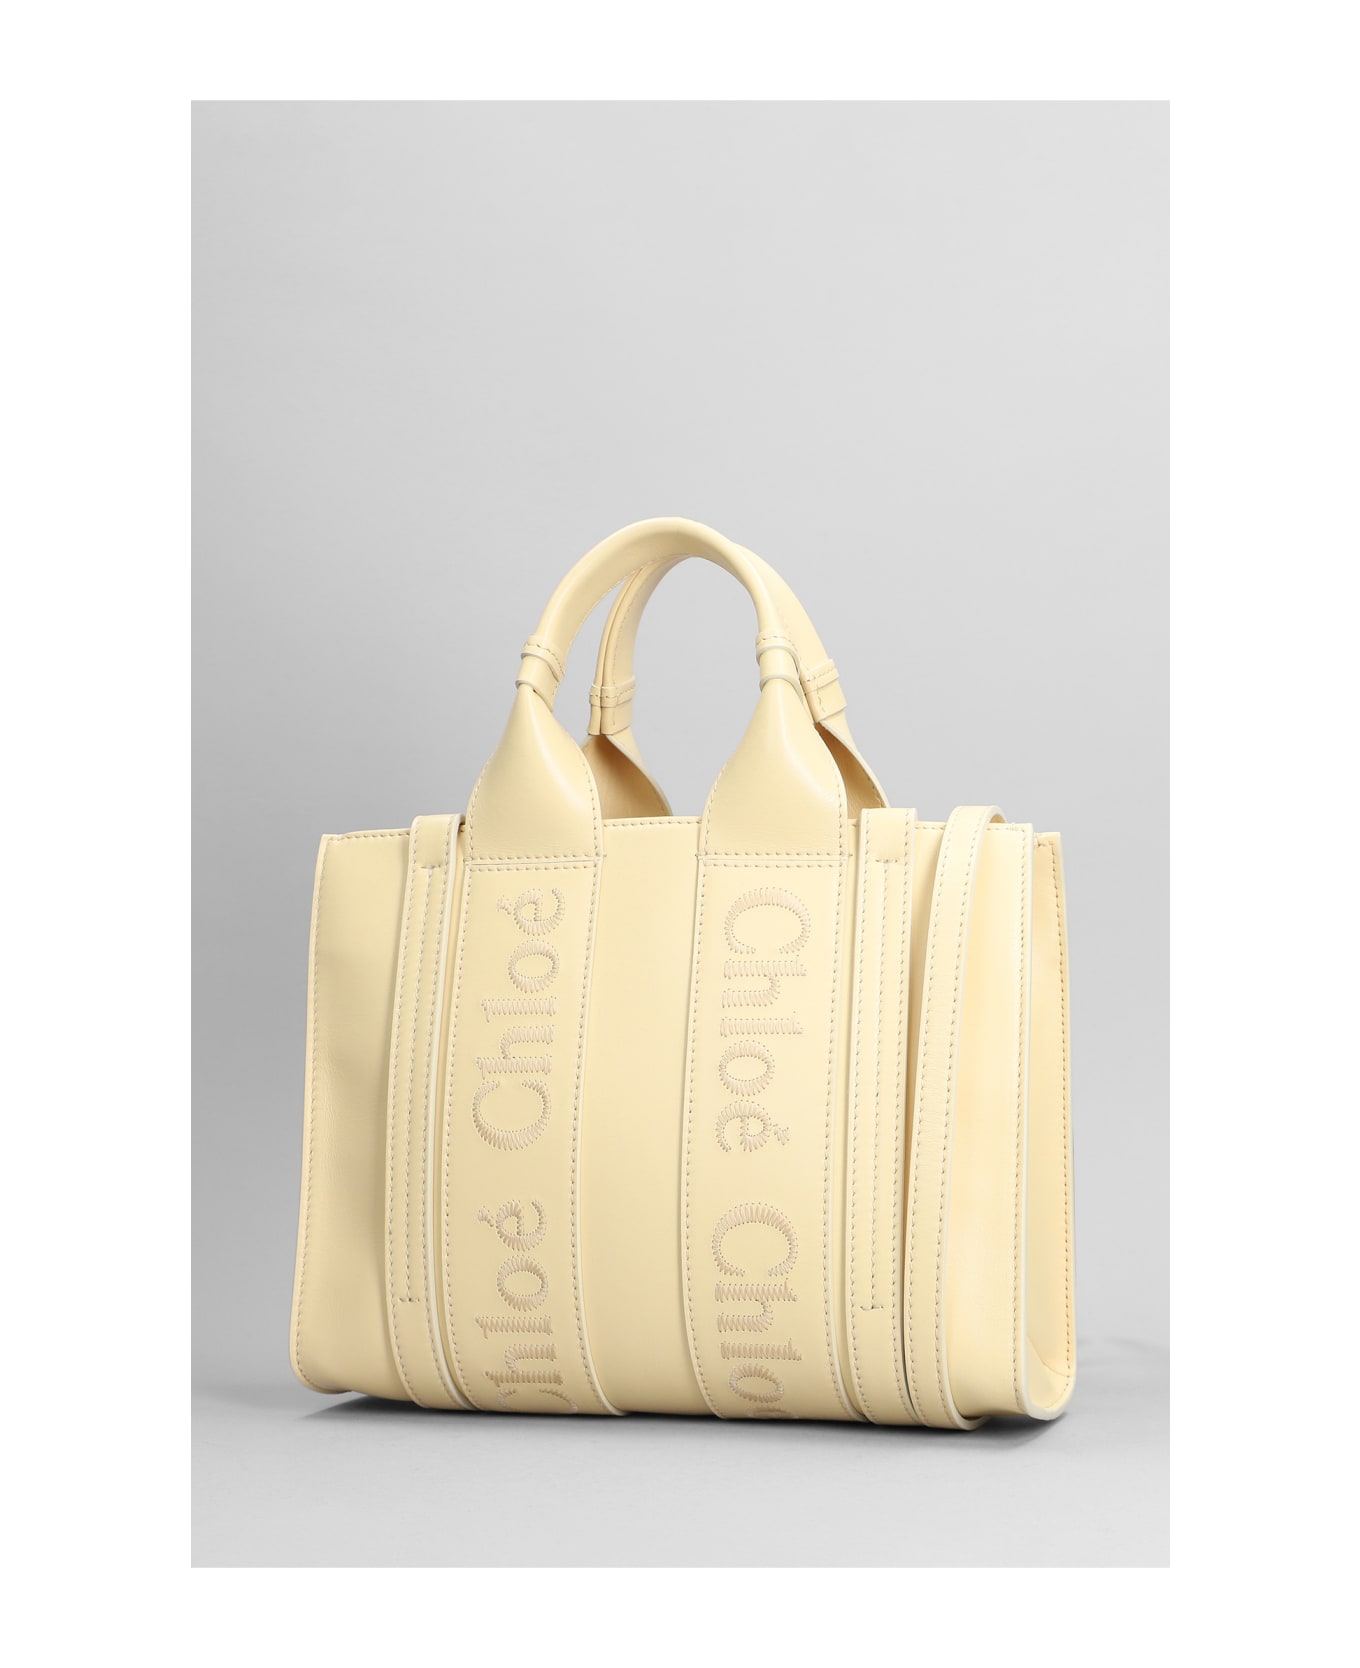 Chloé Woody Tote In Yellow Leather - yellow